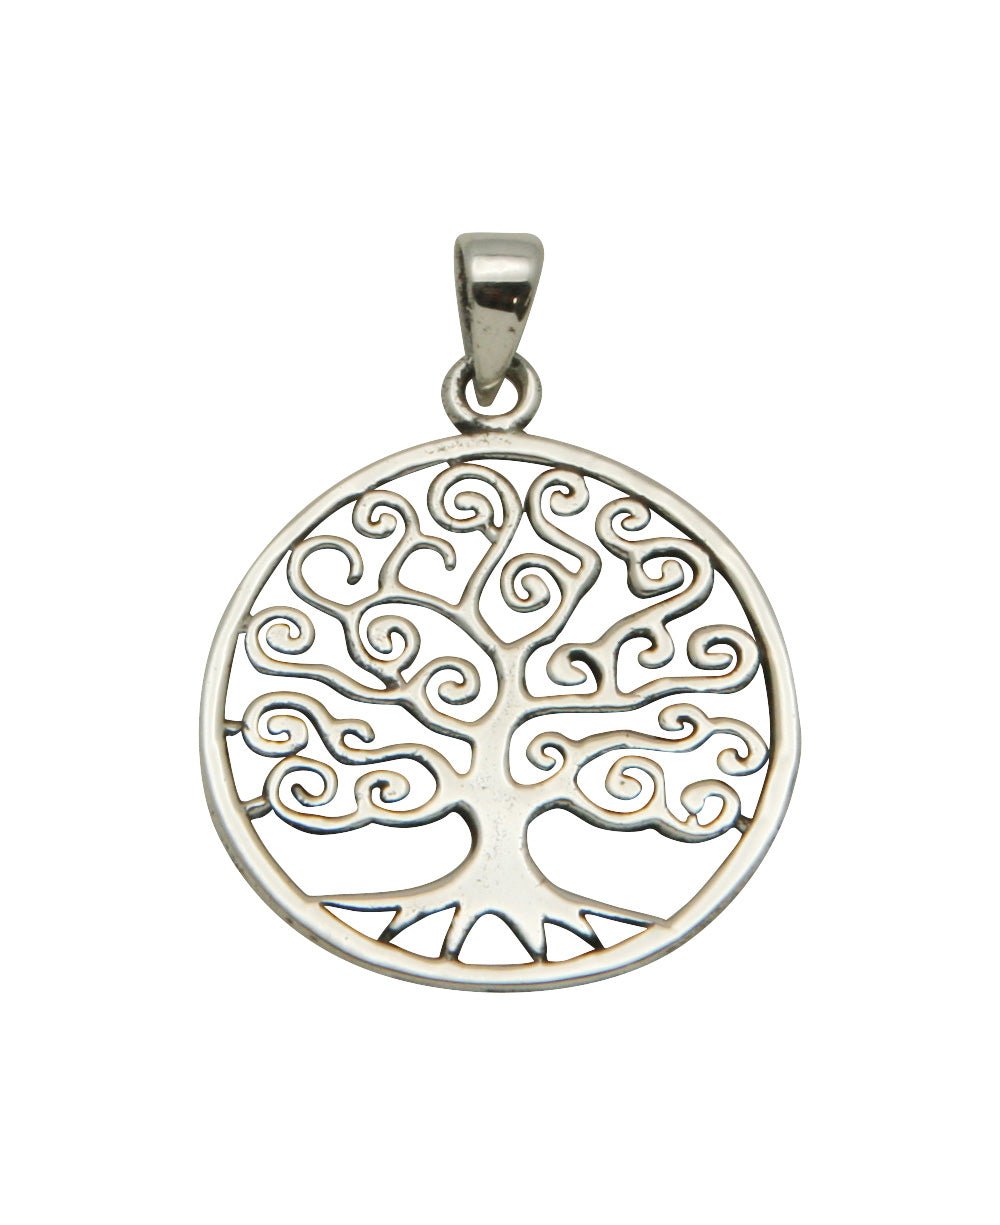 Swirling Tree of Life Round Pendant, Sterling Silver - Charms & Pendants